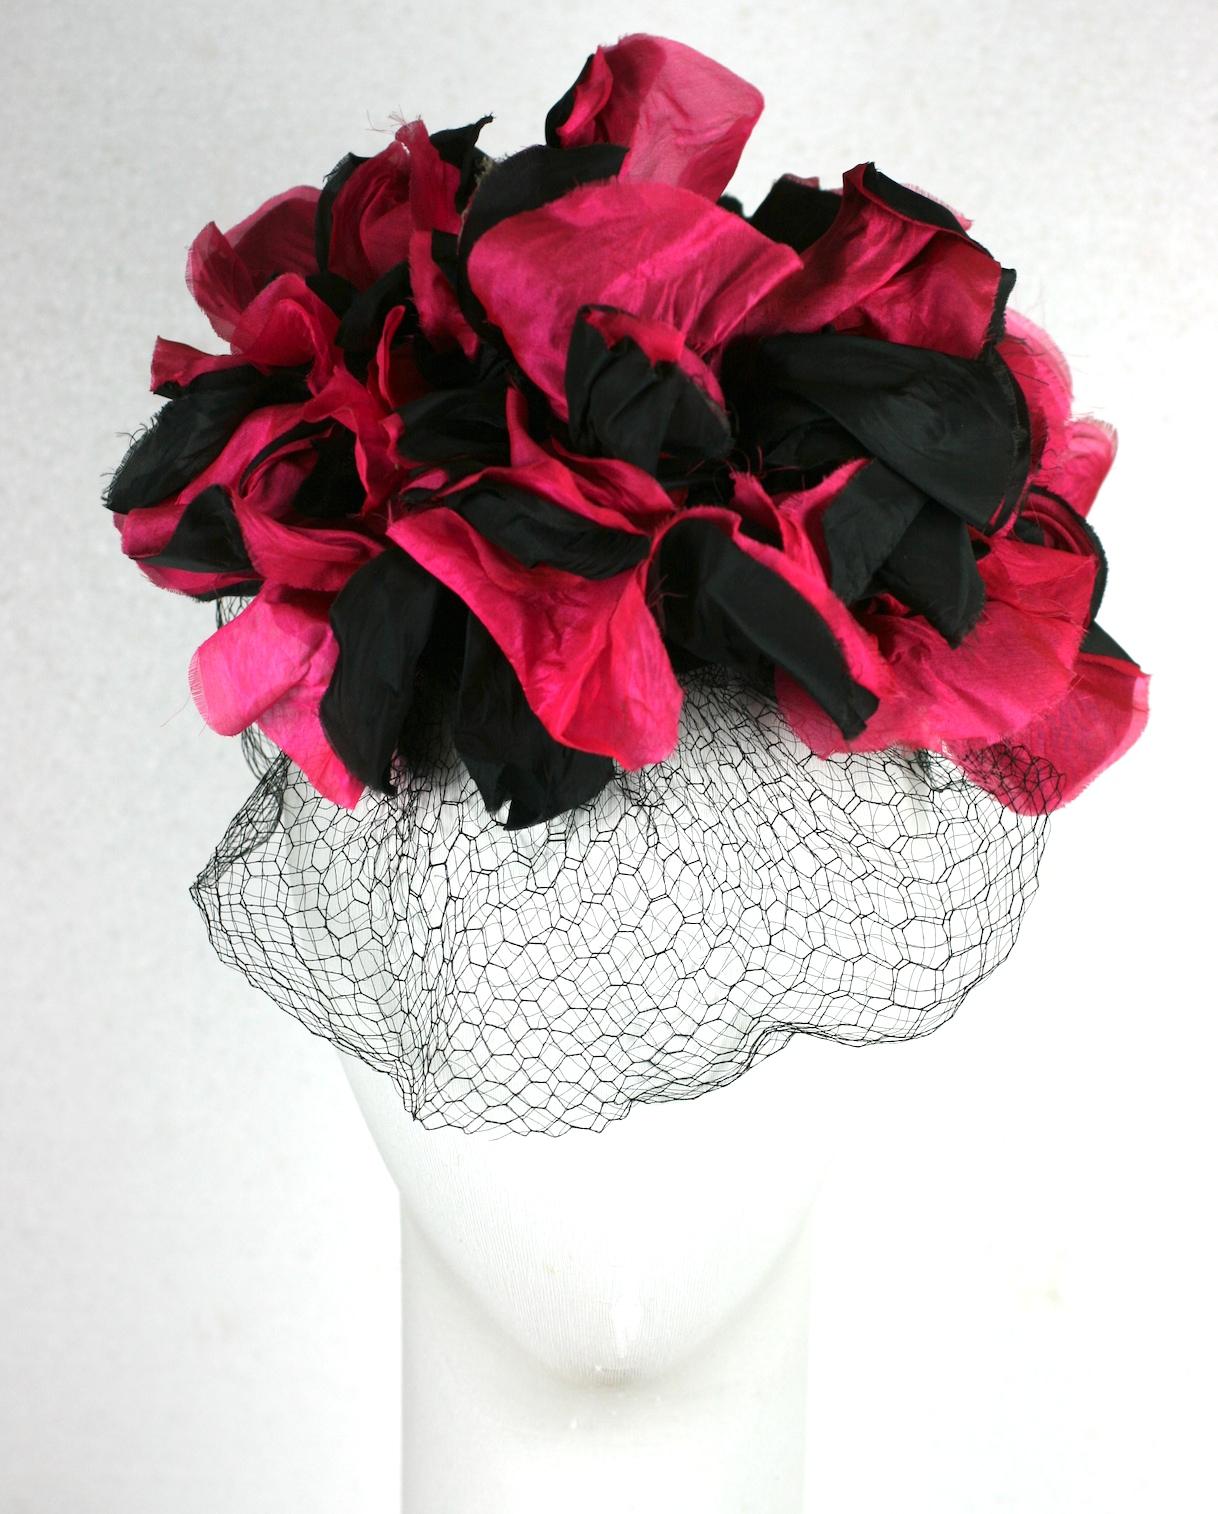 Dramatic Fuschia and Black Silk Flower Topper or Fascinator from the late 1930's. Large silky blooms perched on a tiny cap with self fabric wire covered hoop, elastic band and front silk veil. Retailed at Burdines, with original price tag.
Late